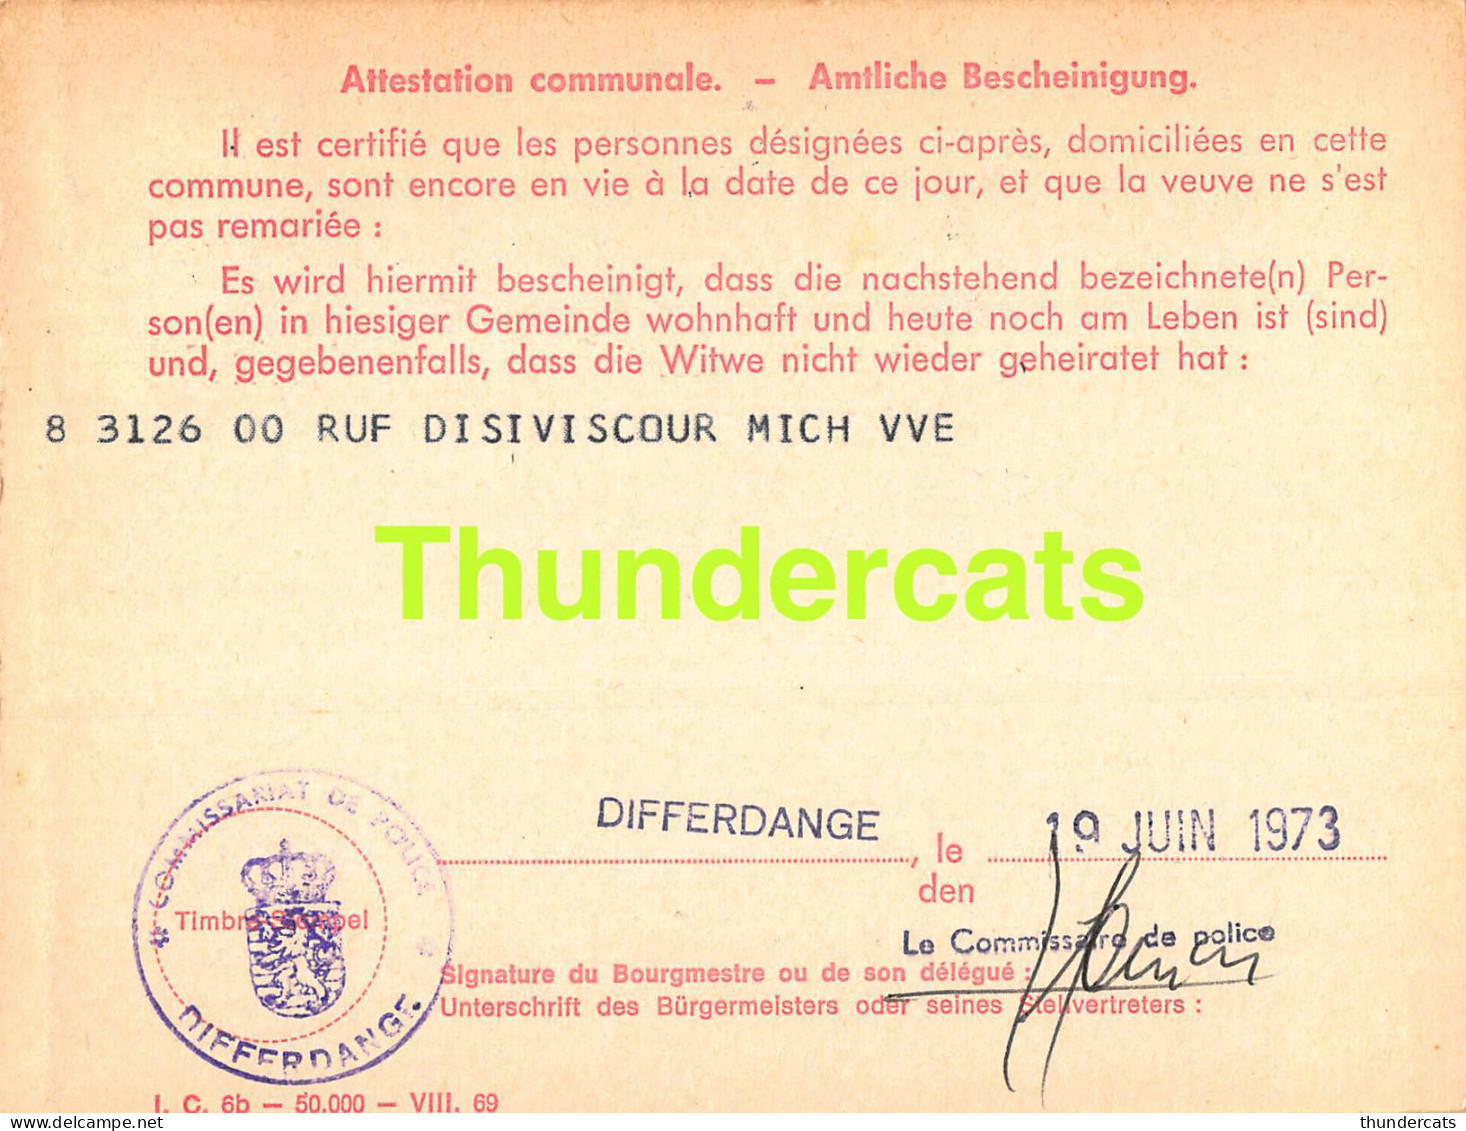 ASSURANCE VIEILLESSE INVALIDITE LUXEMBOURG 1973 RUF DISIVISCOUR DIFFERDANGE  - Covers & Documents